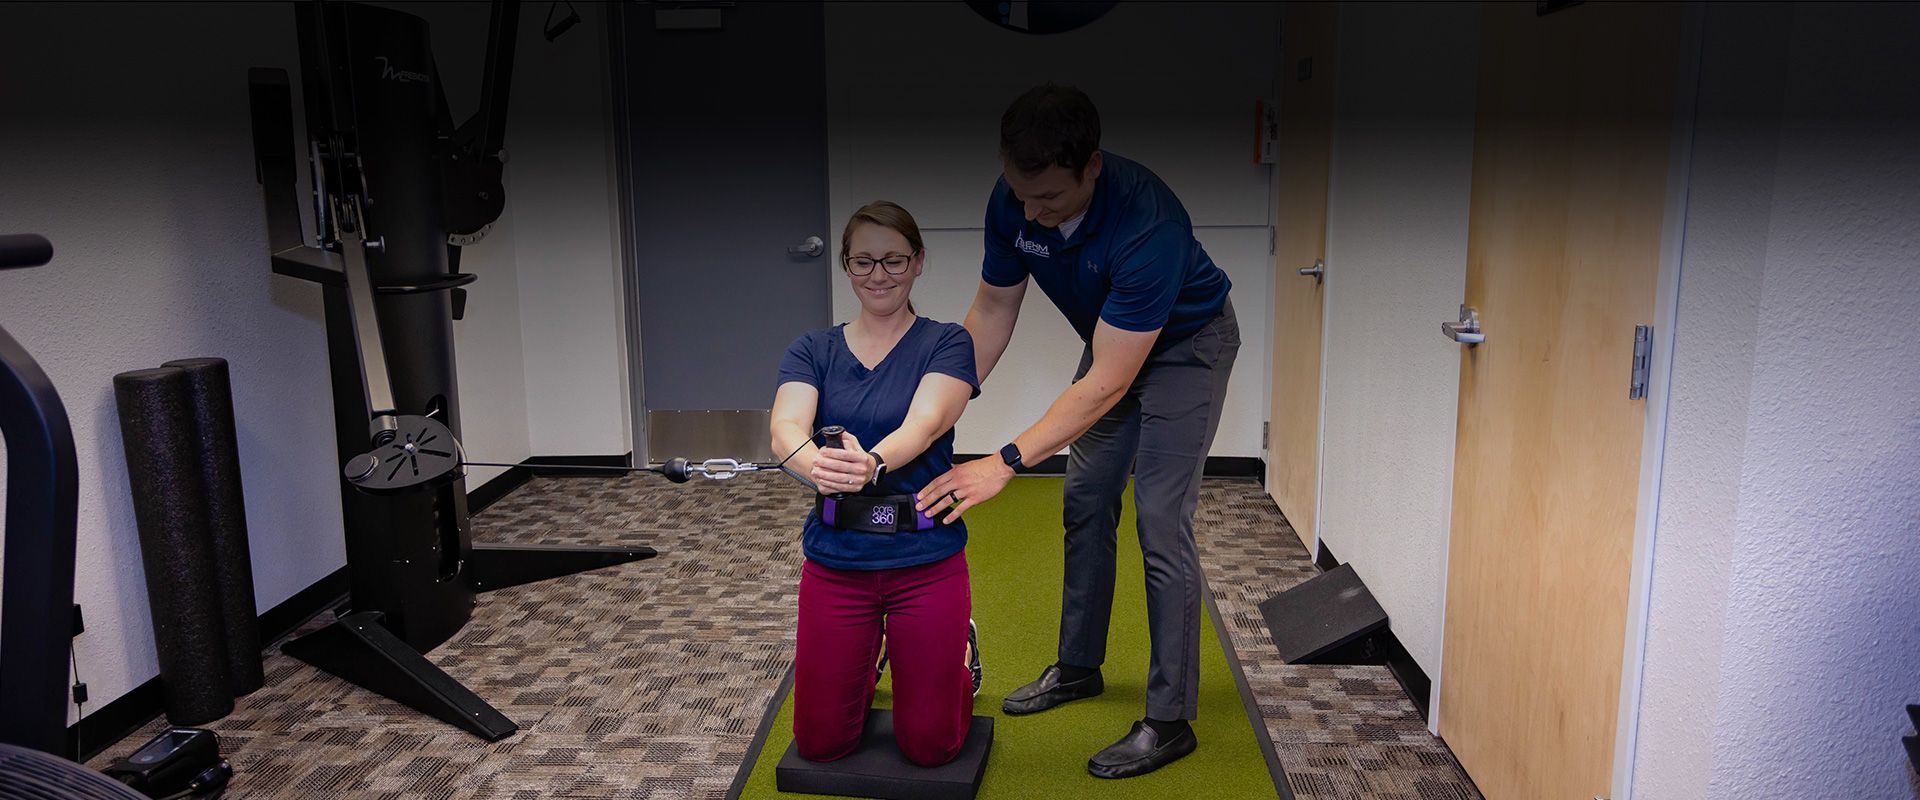 chiropractor helping with physical rehabilitation exercises